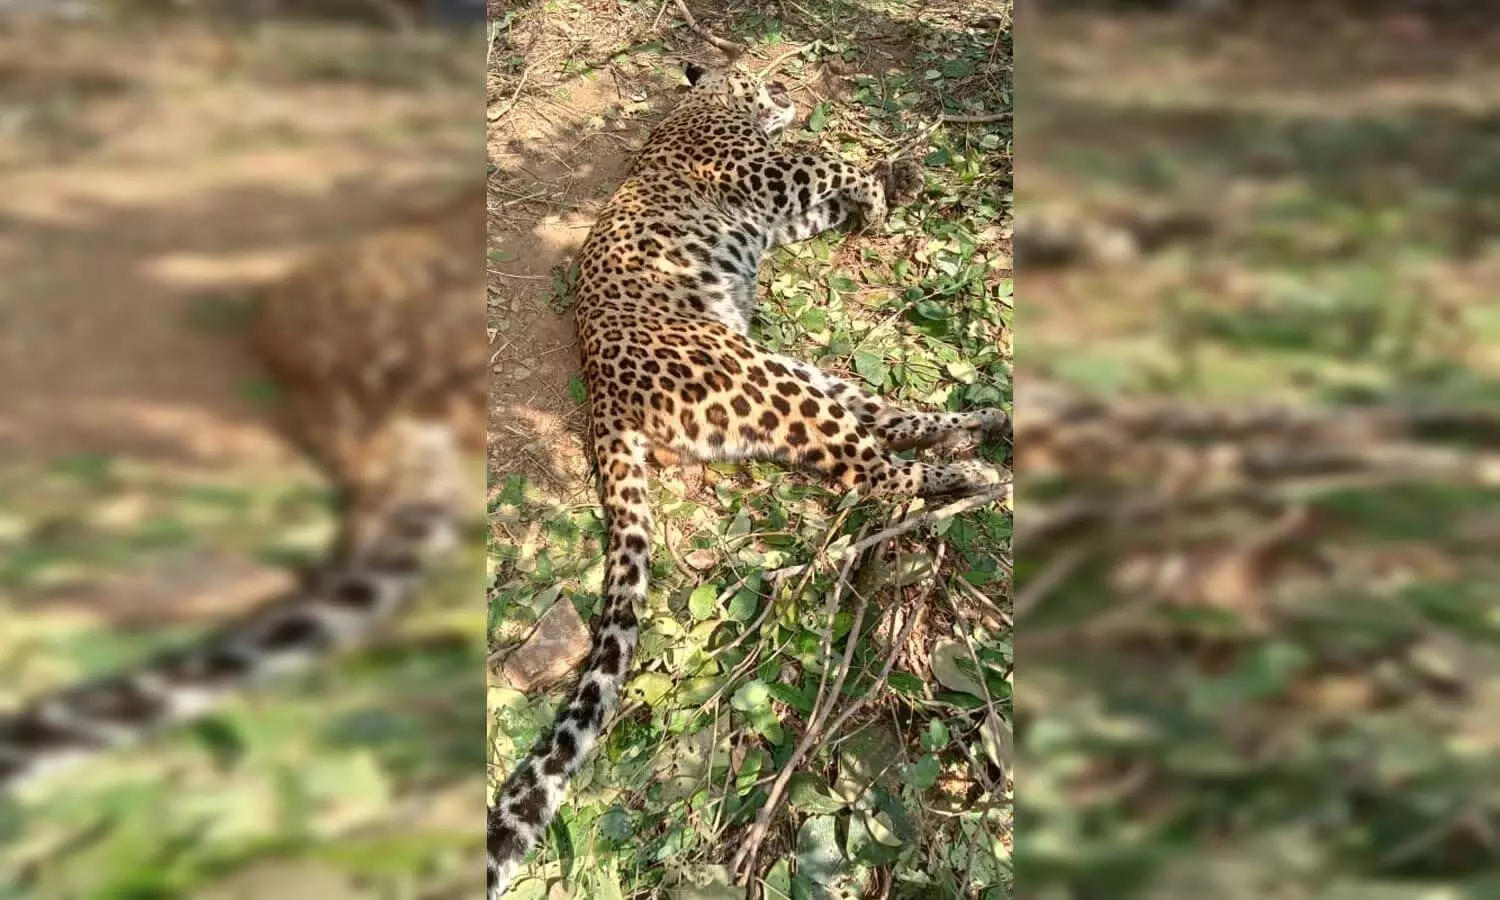 Dead body of leopard found in suspicious condition in Sonbhadra mystery deepened due to absence of injury marks on the body